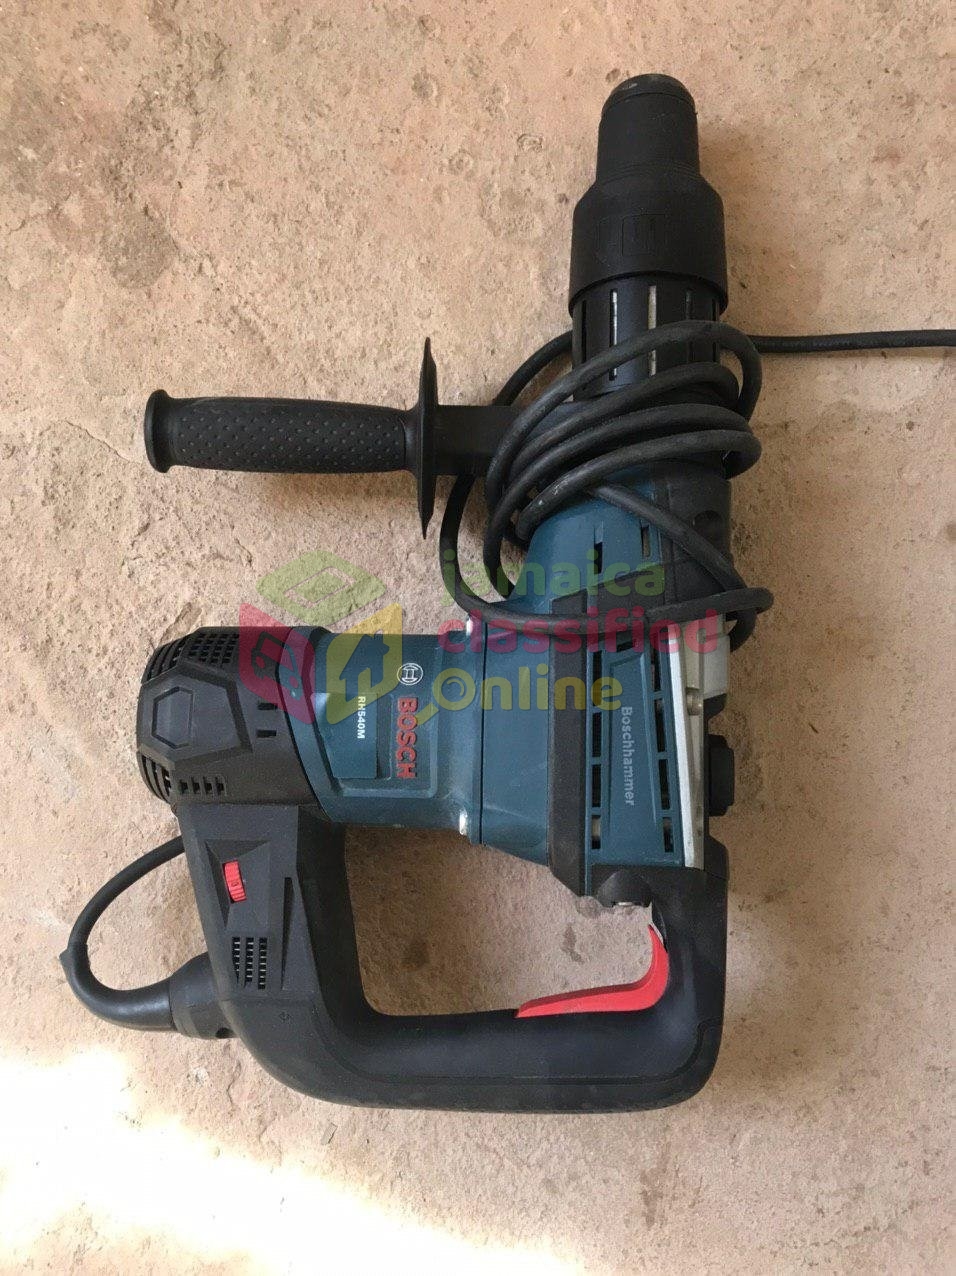 New Bosch SDS-Max Combination Rotary Hammer for sale in Cross Roads